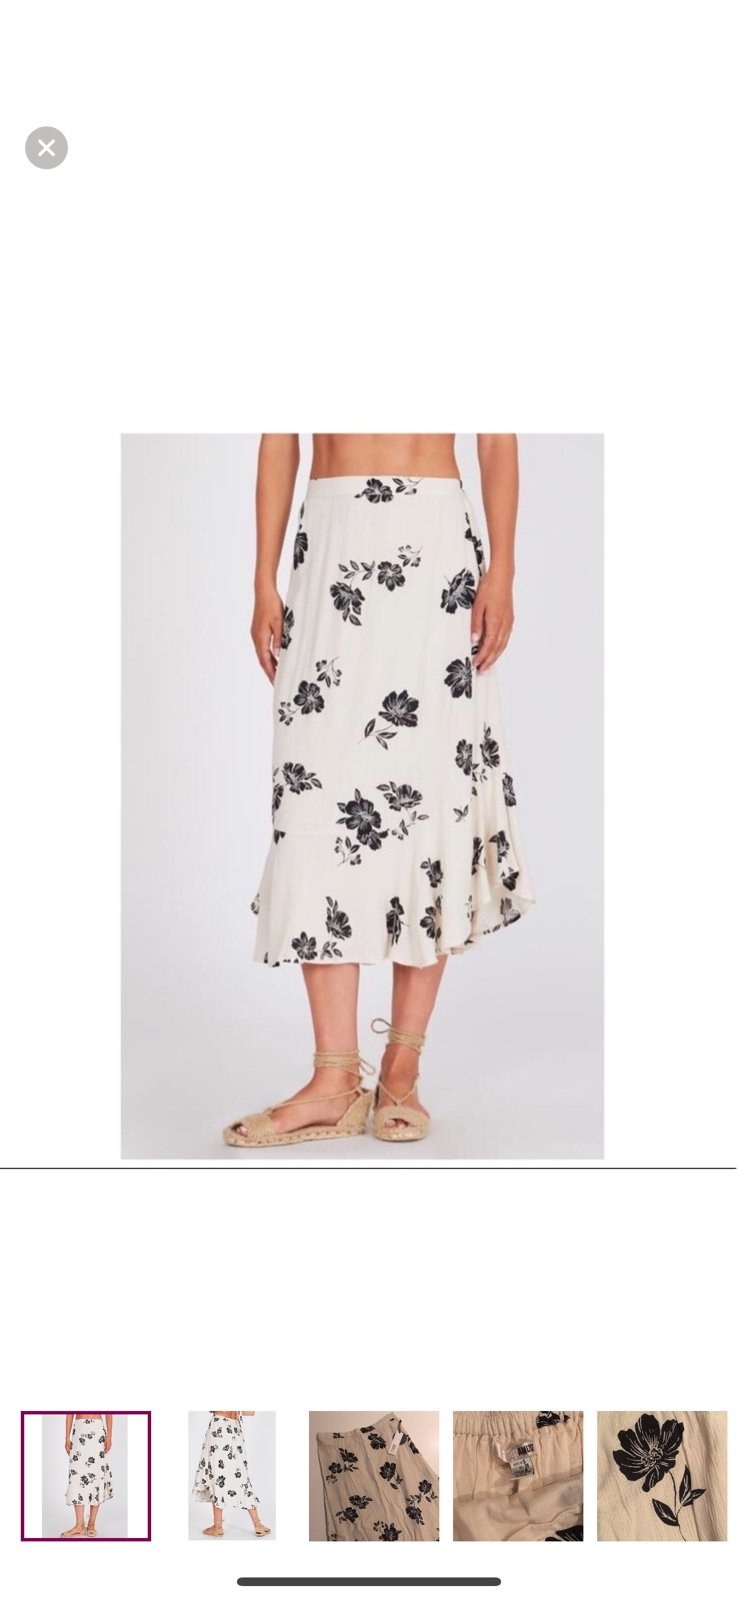 Discounted NEW Amuse Society The Jardines Del Rey Floral Midi Skirt HAkkkmoh4 online store